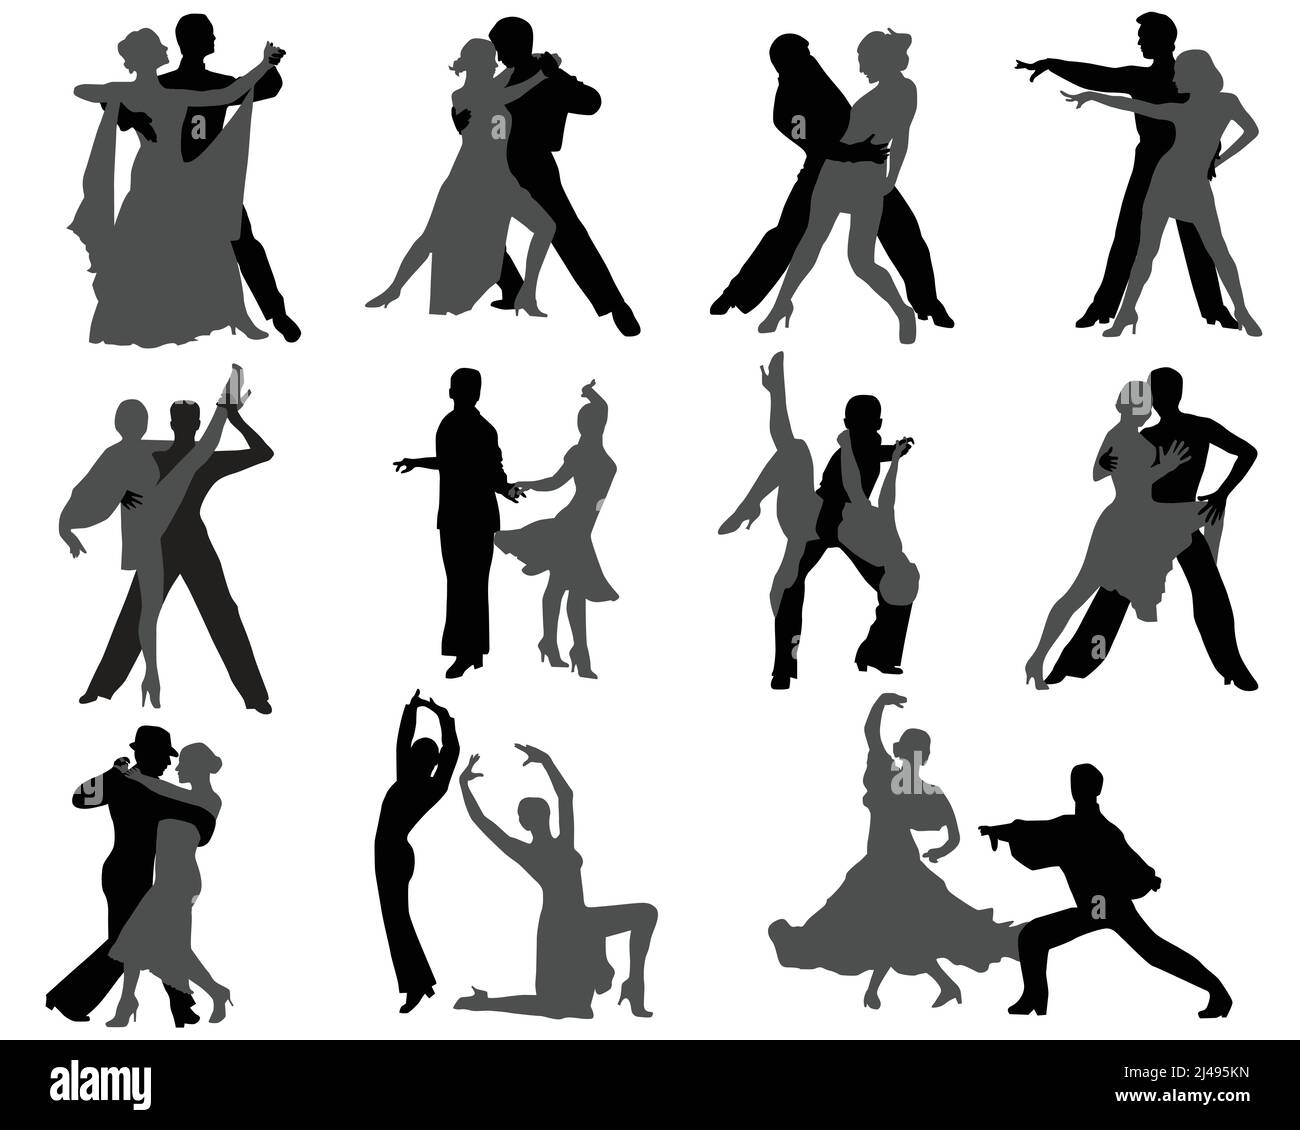 Silhouettes of the dancing couples, different styles of dance Stock Vector